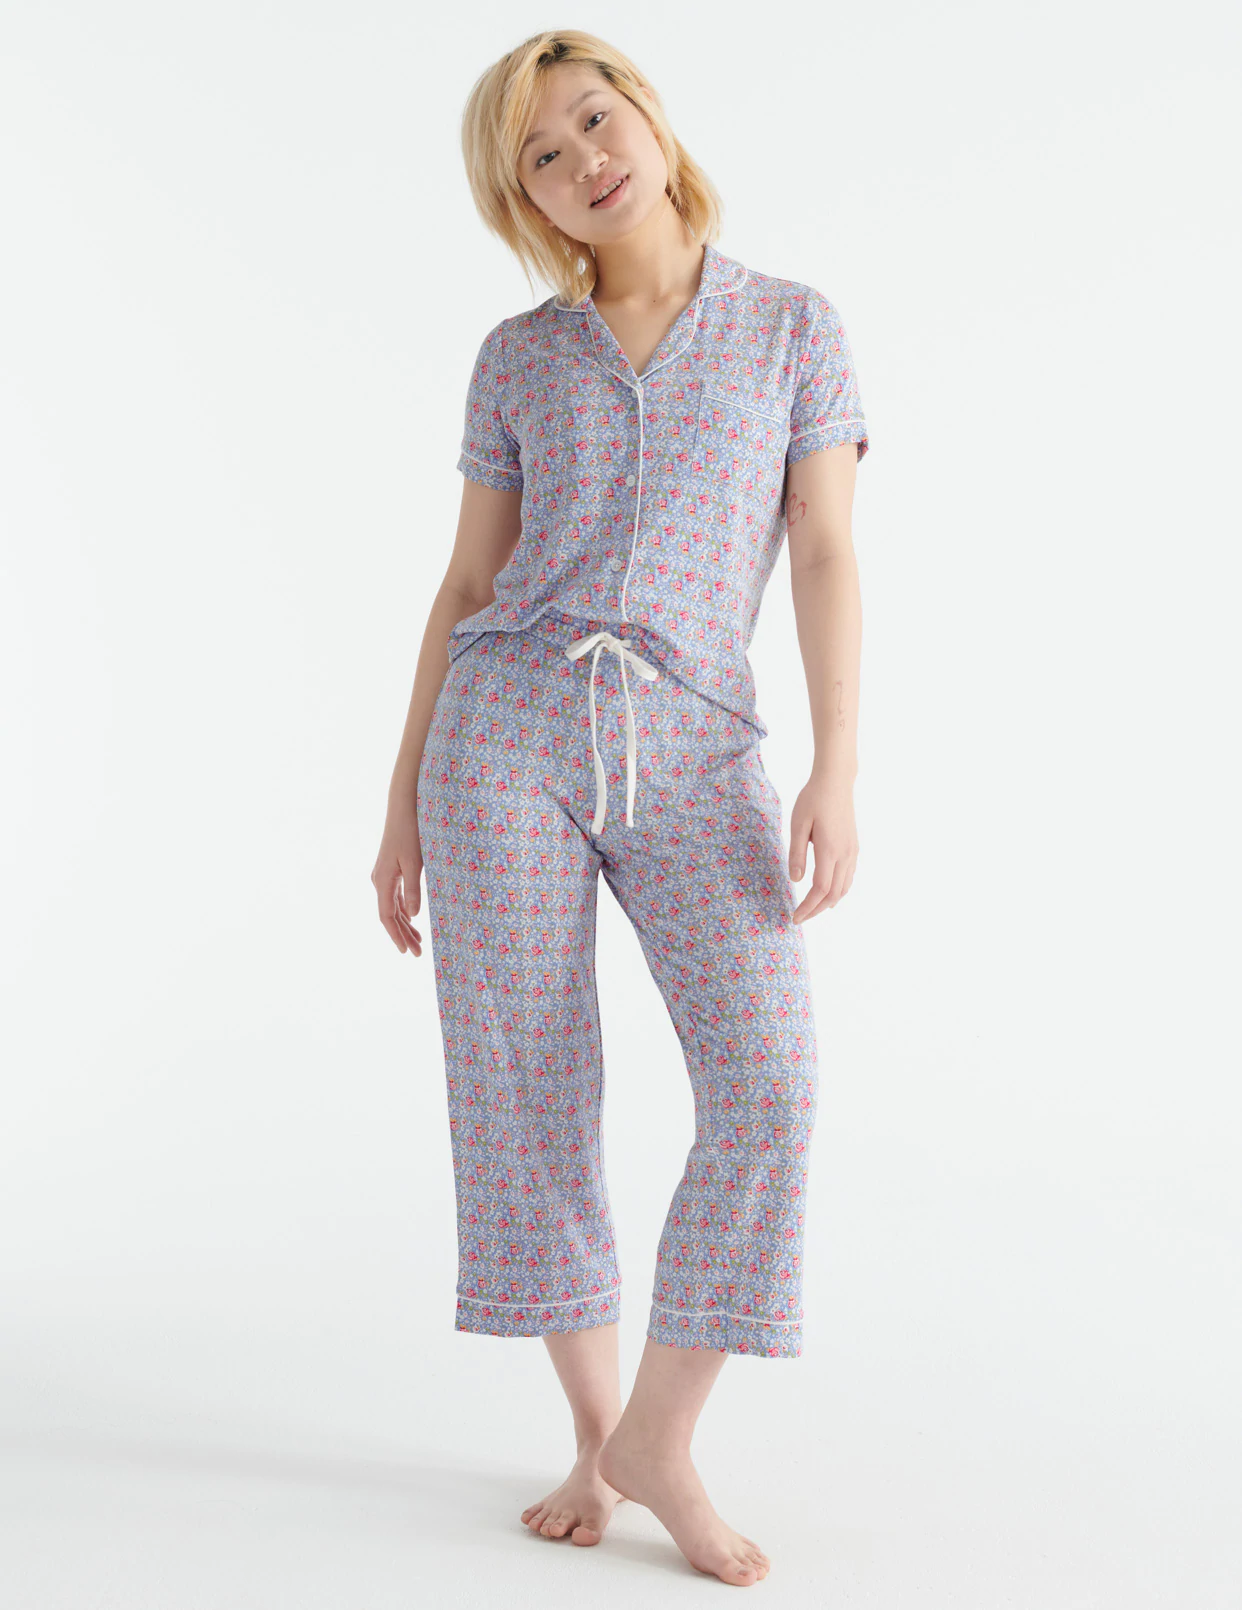 A person wearing a pyjama top and matching pants